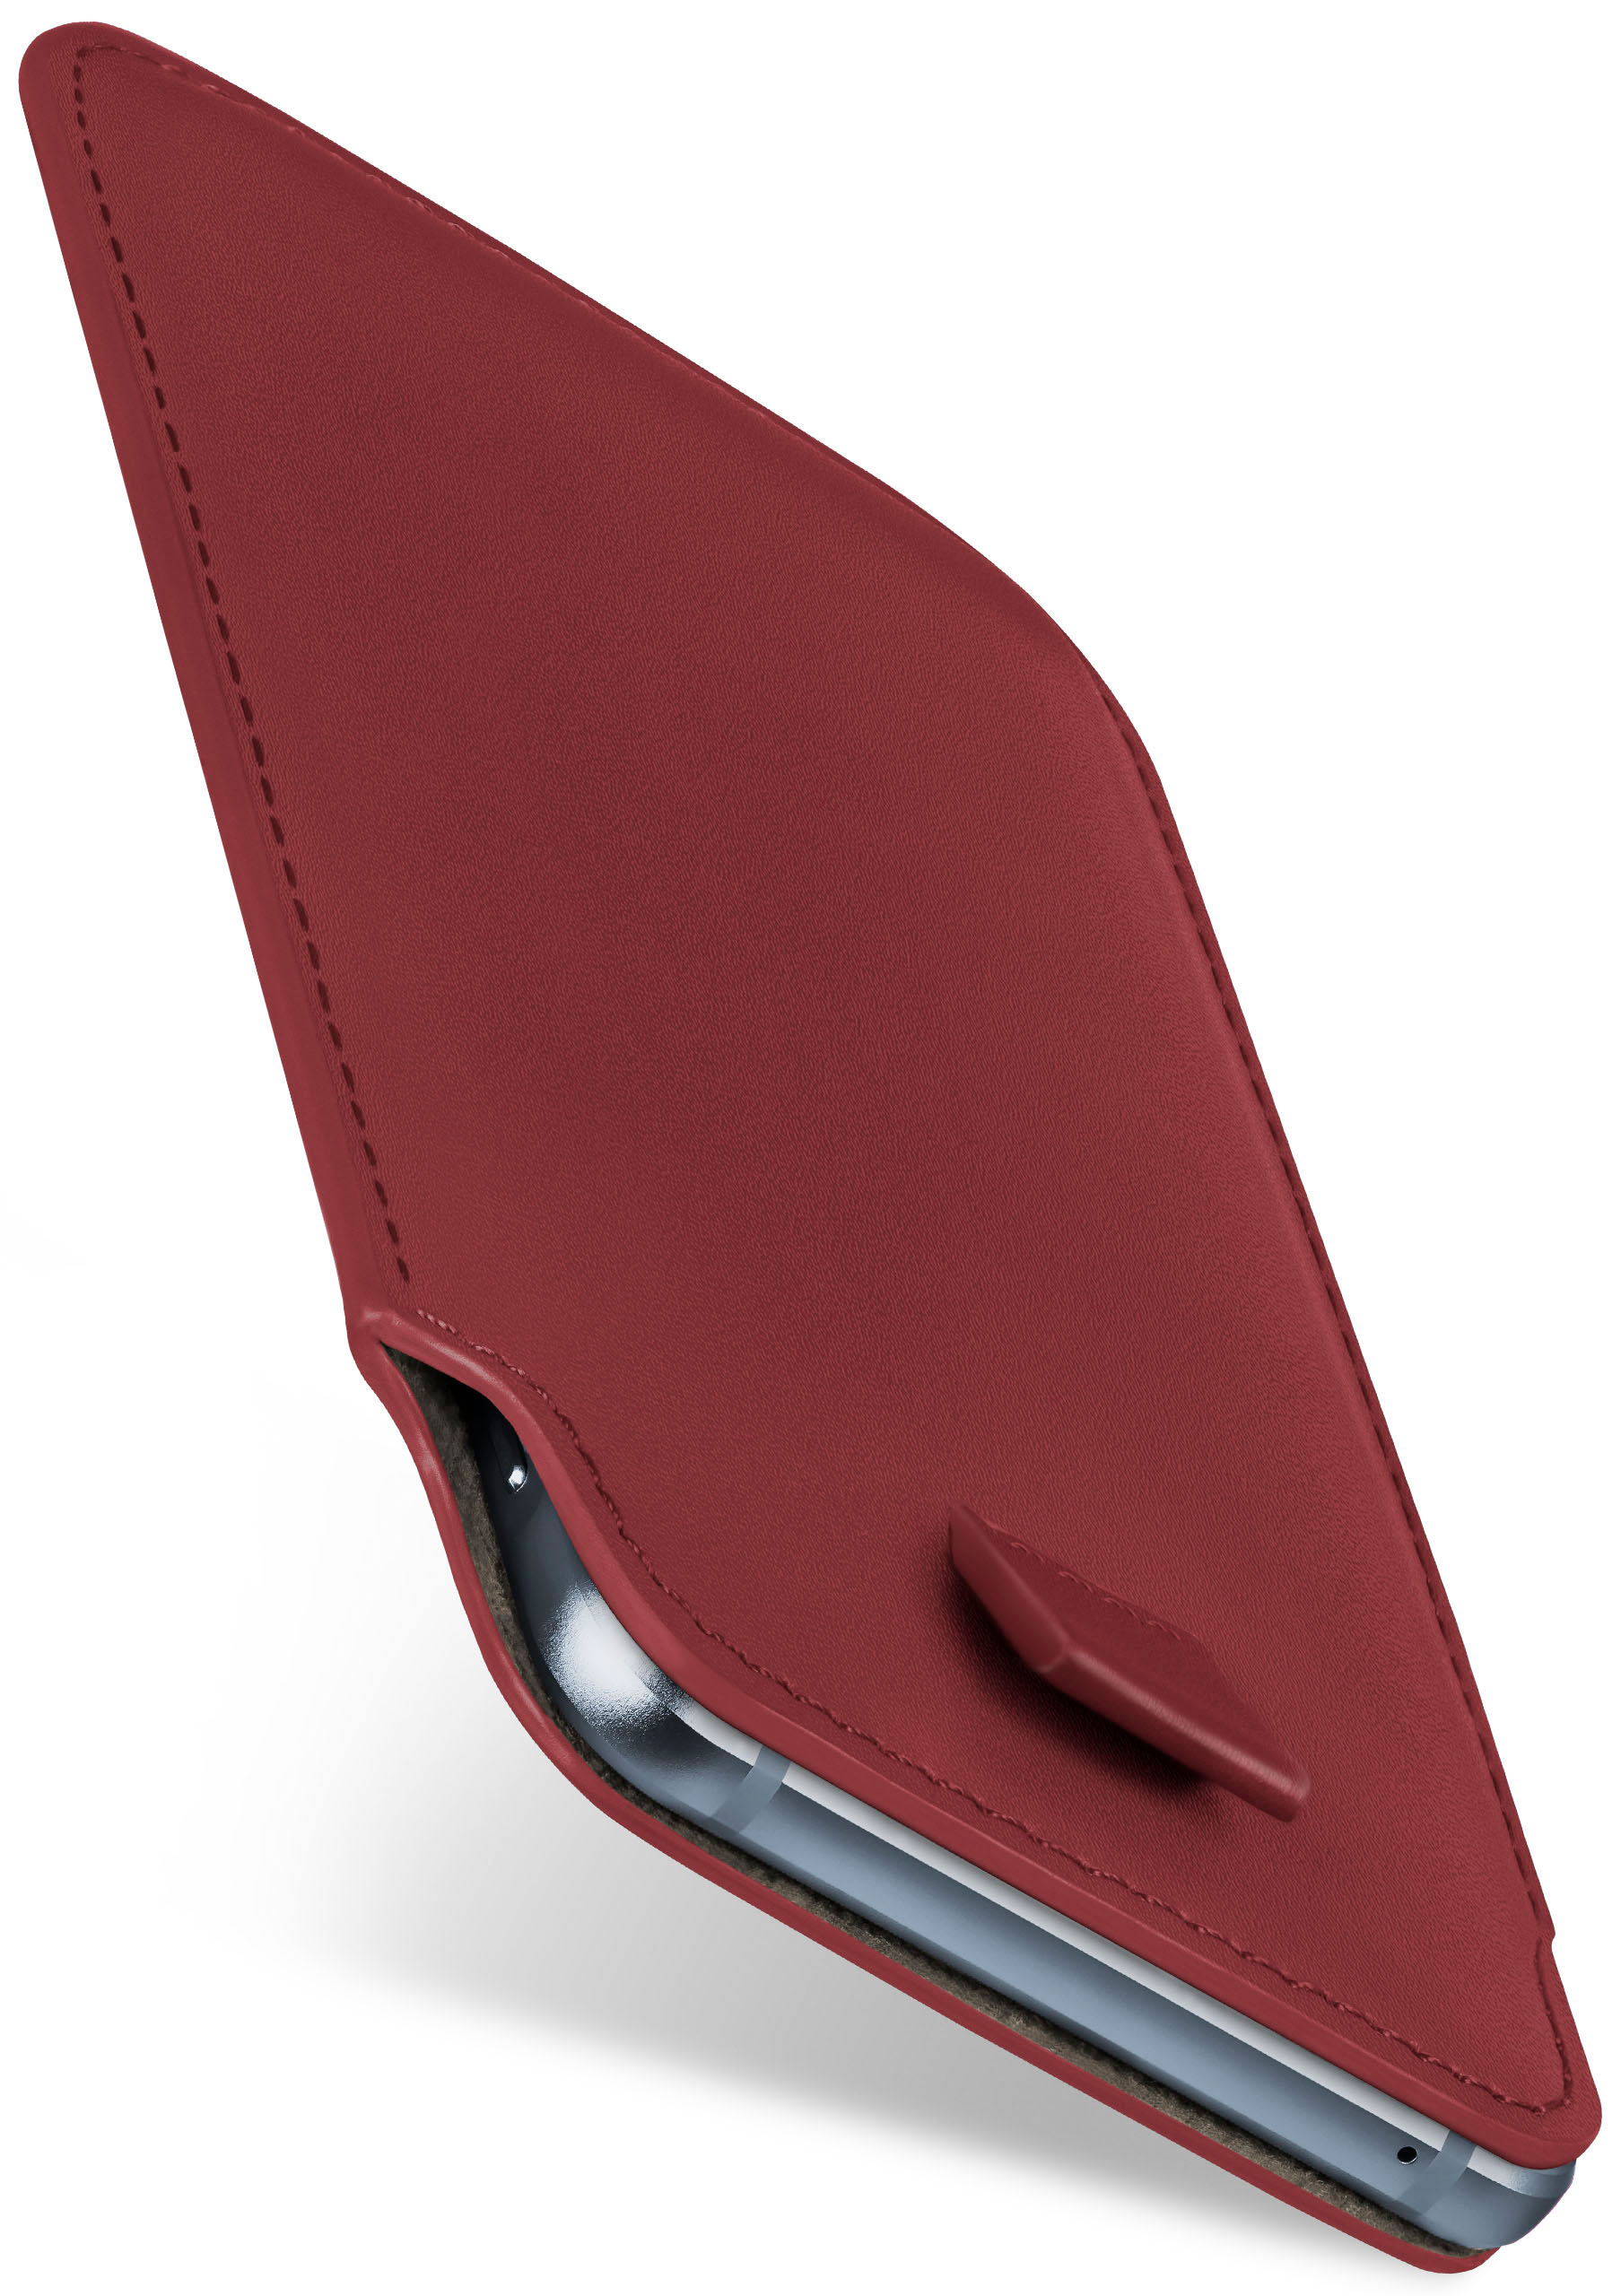 Maroon-Red View2 Full MOEX Slide Wiko, Case, Pro, Cover,